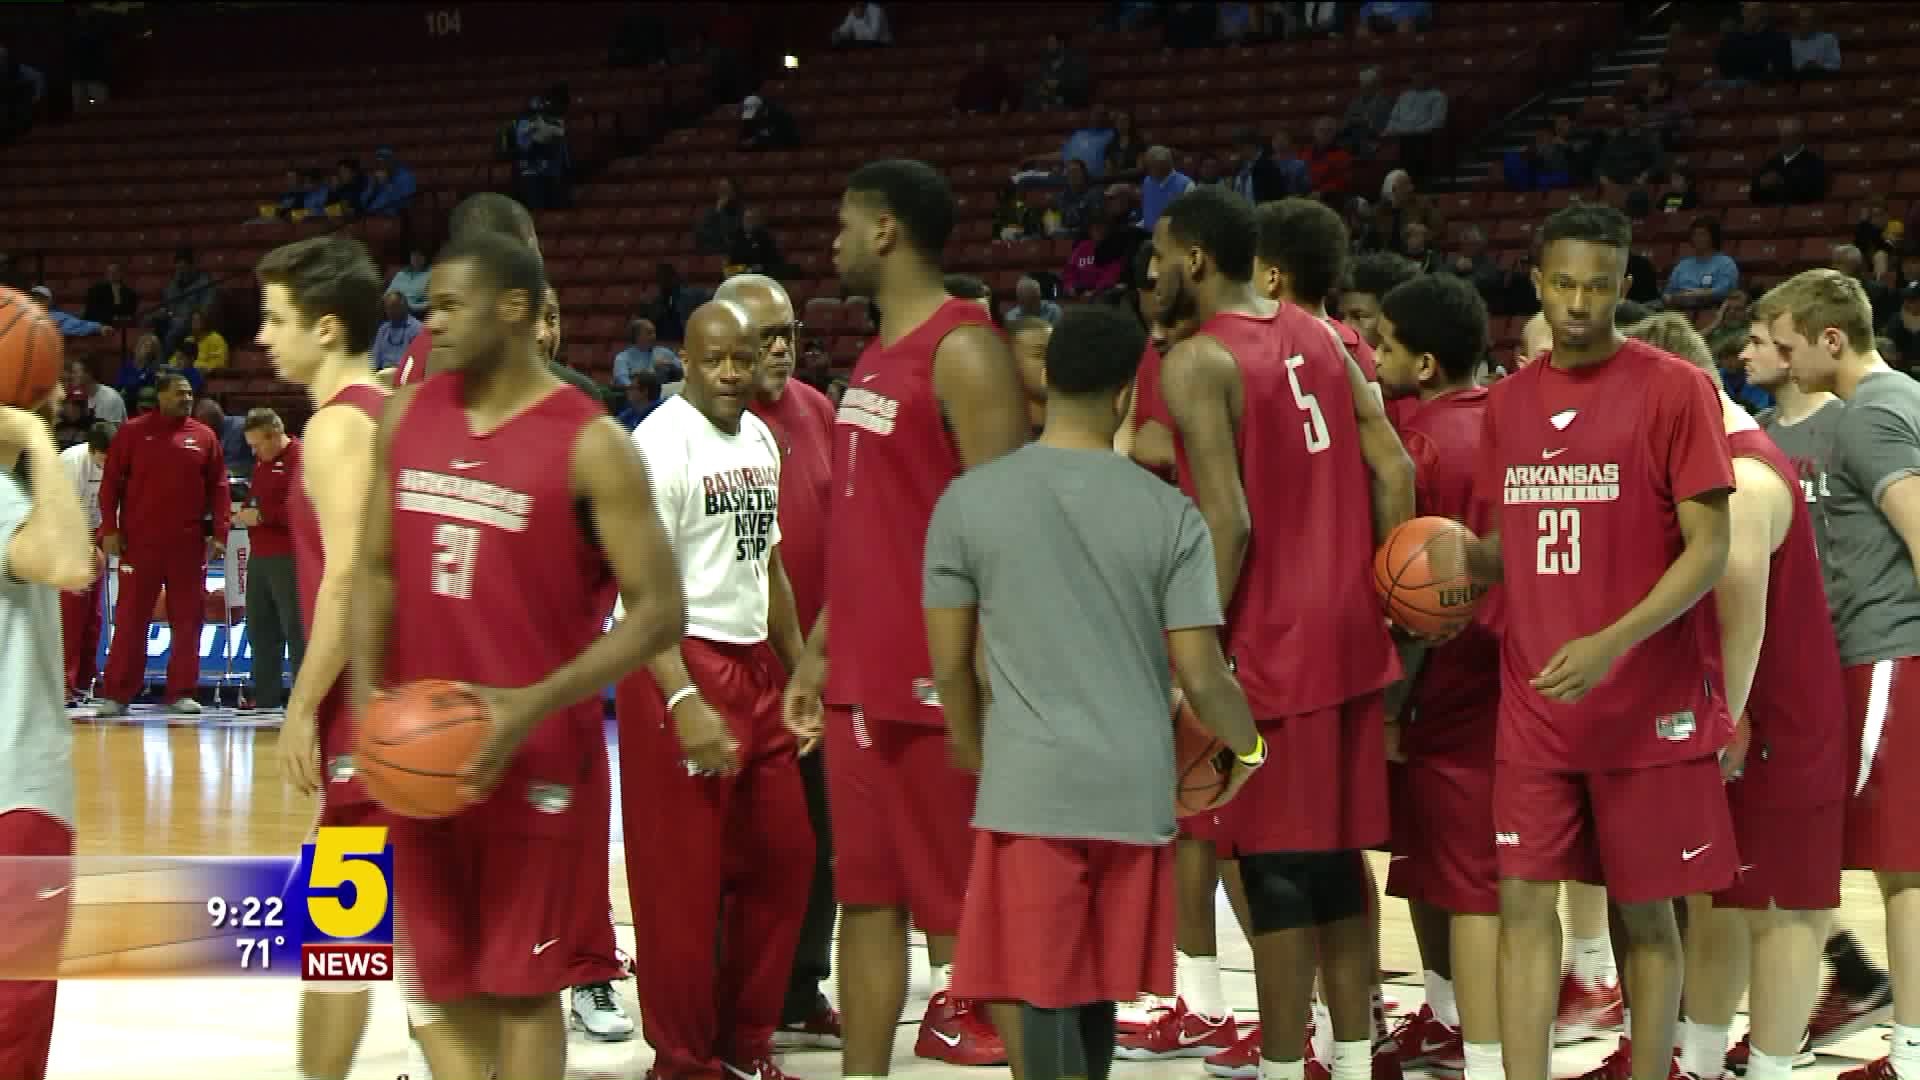 Arkansas Ready To Challenge North Carolina For Spot In Sweet 16